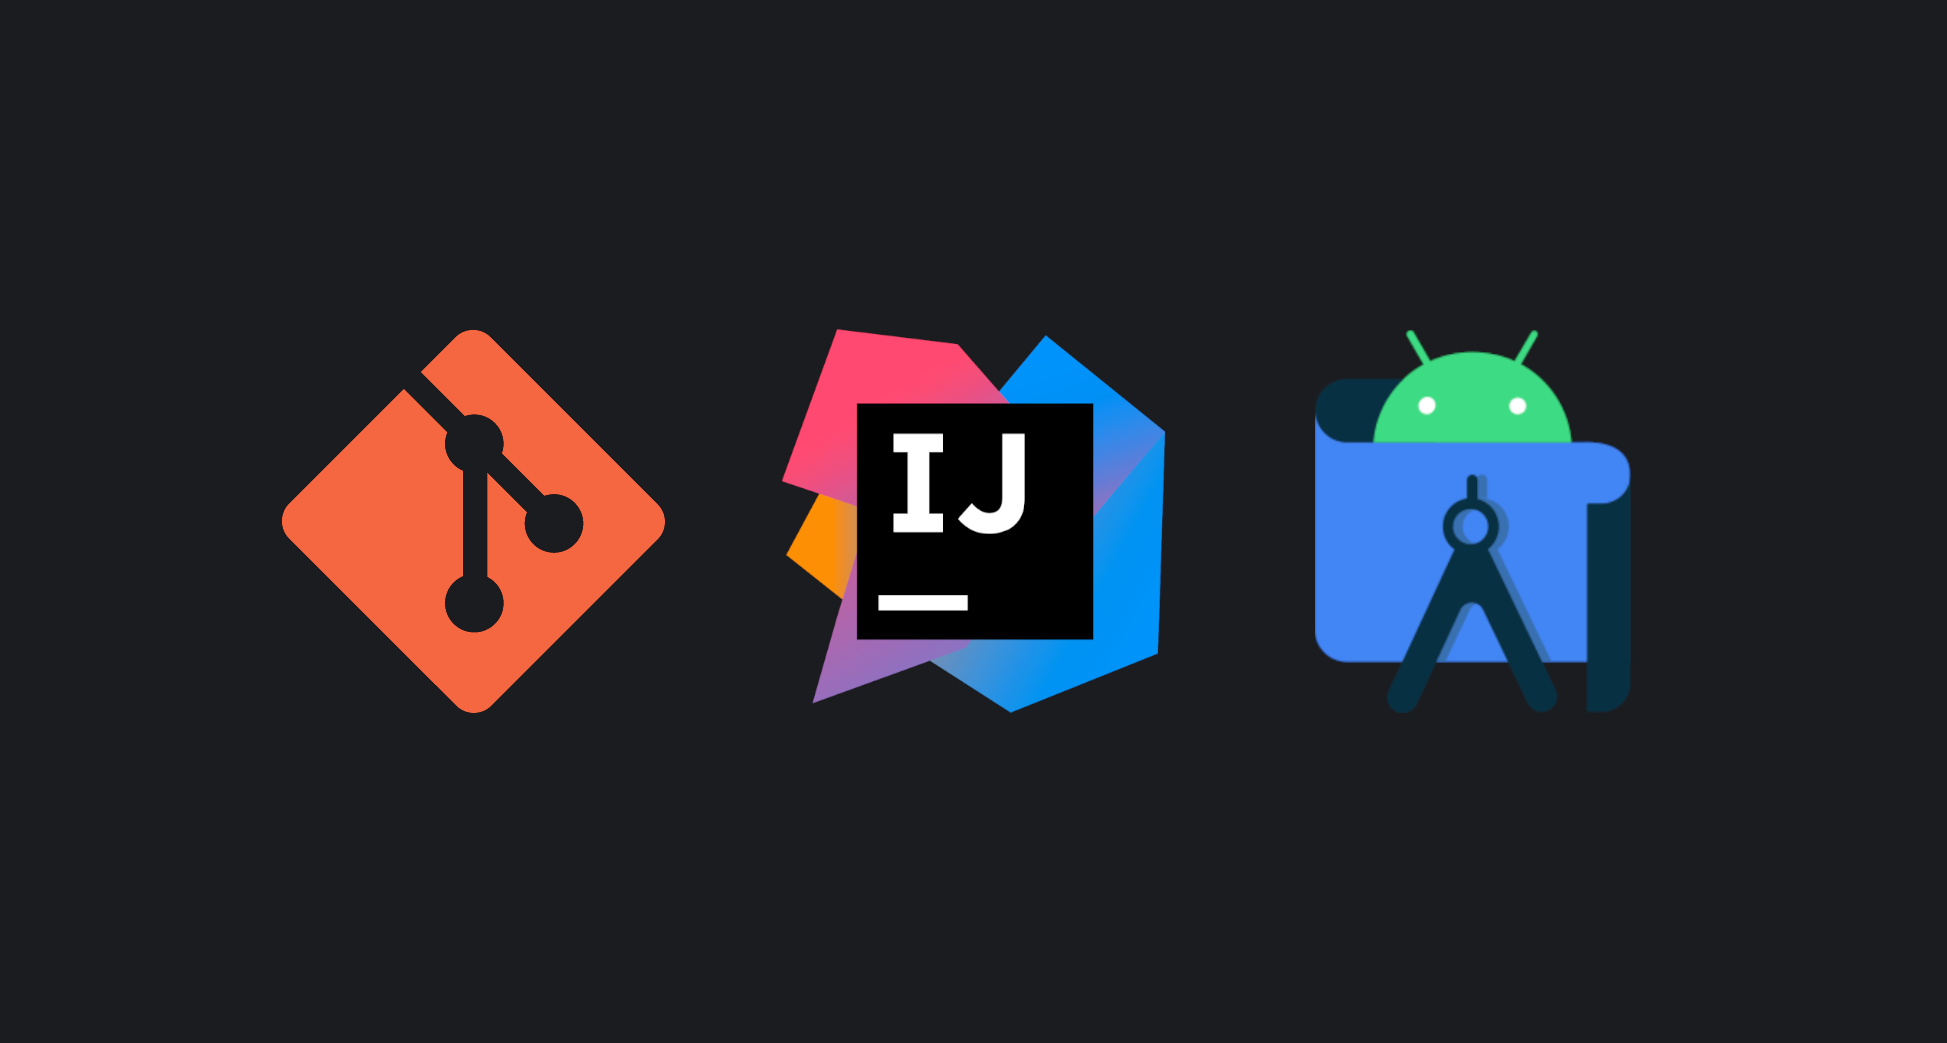 My Git Workflow for IntelliJ and The Command Line